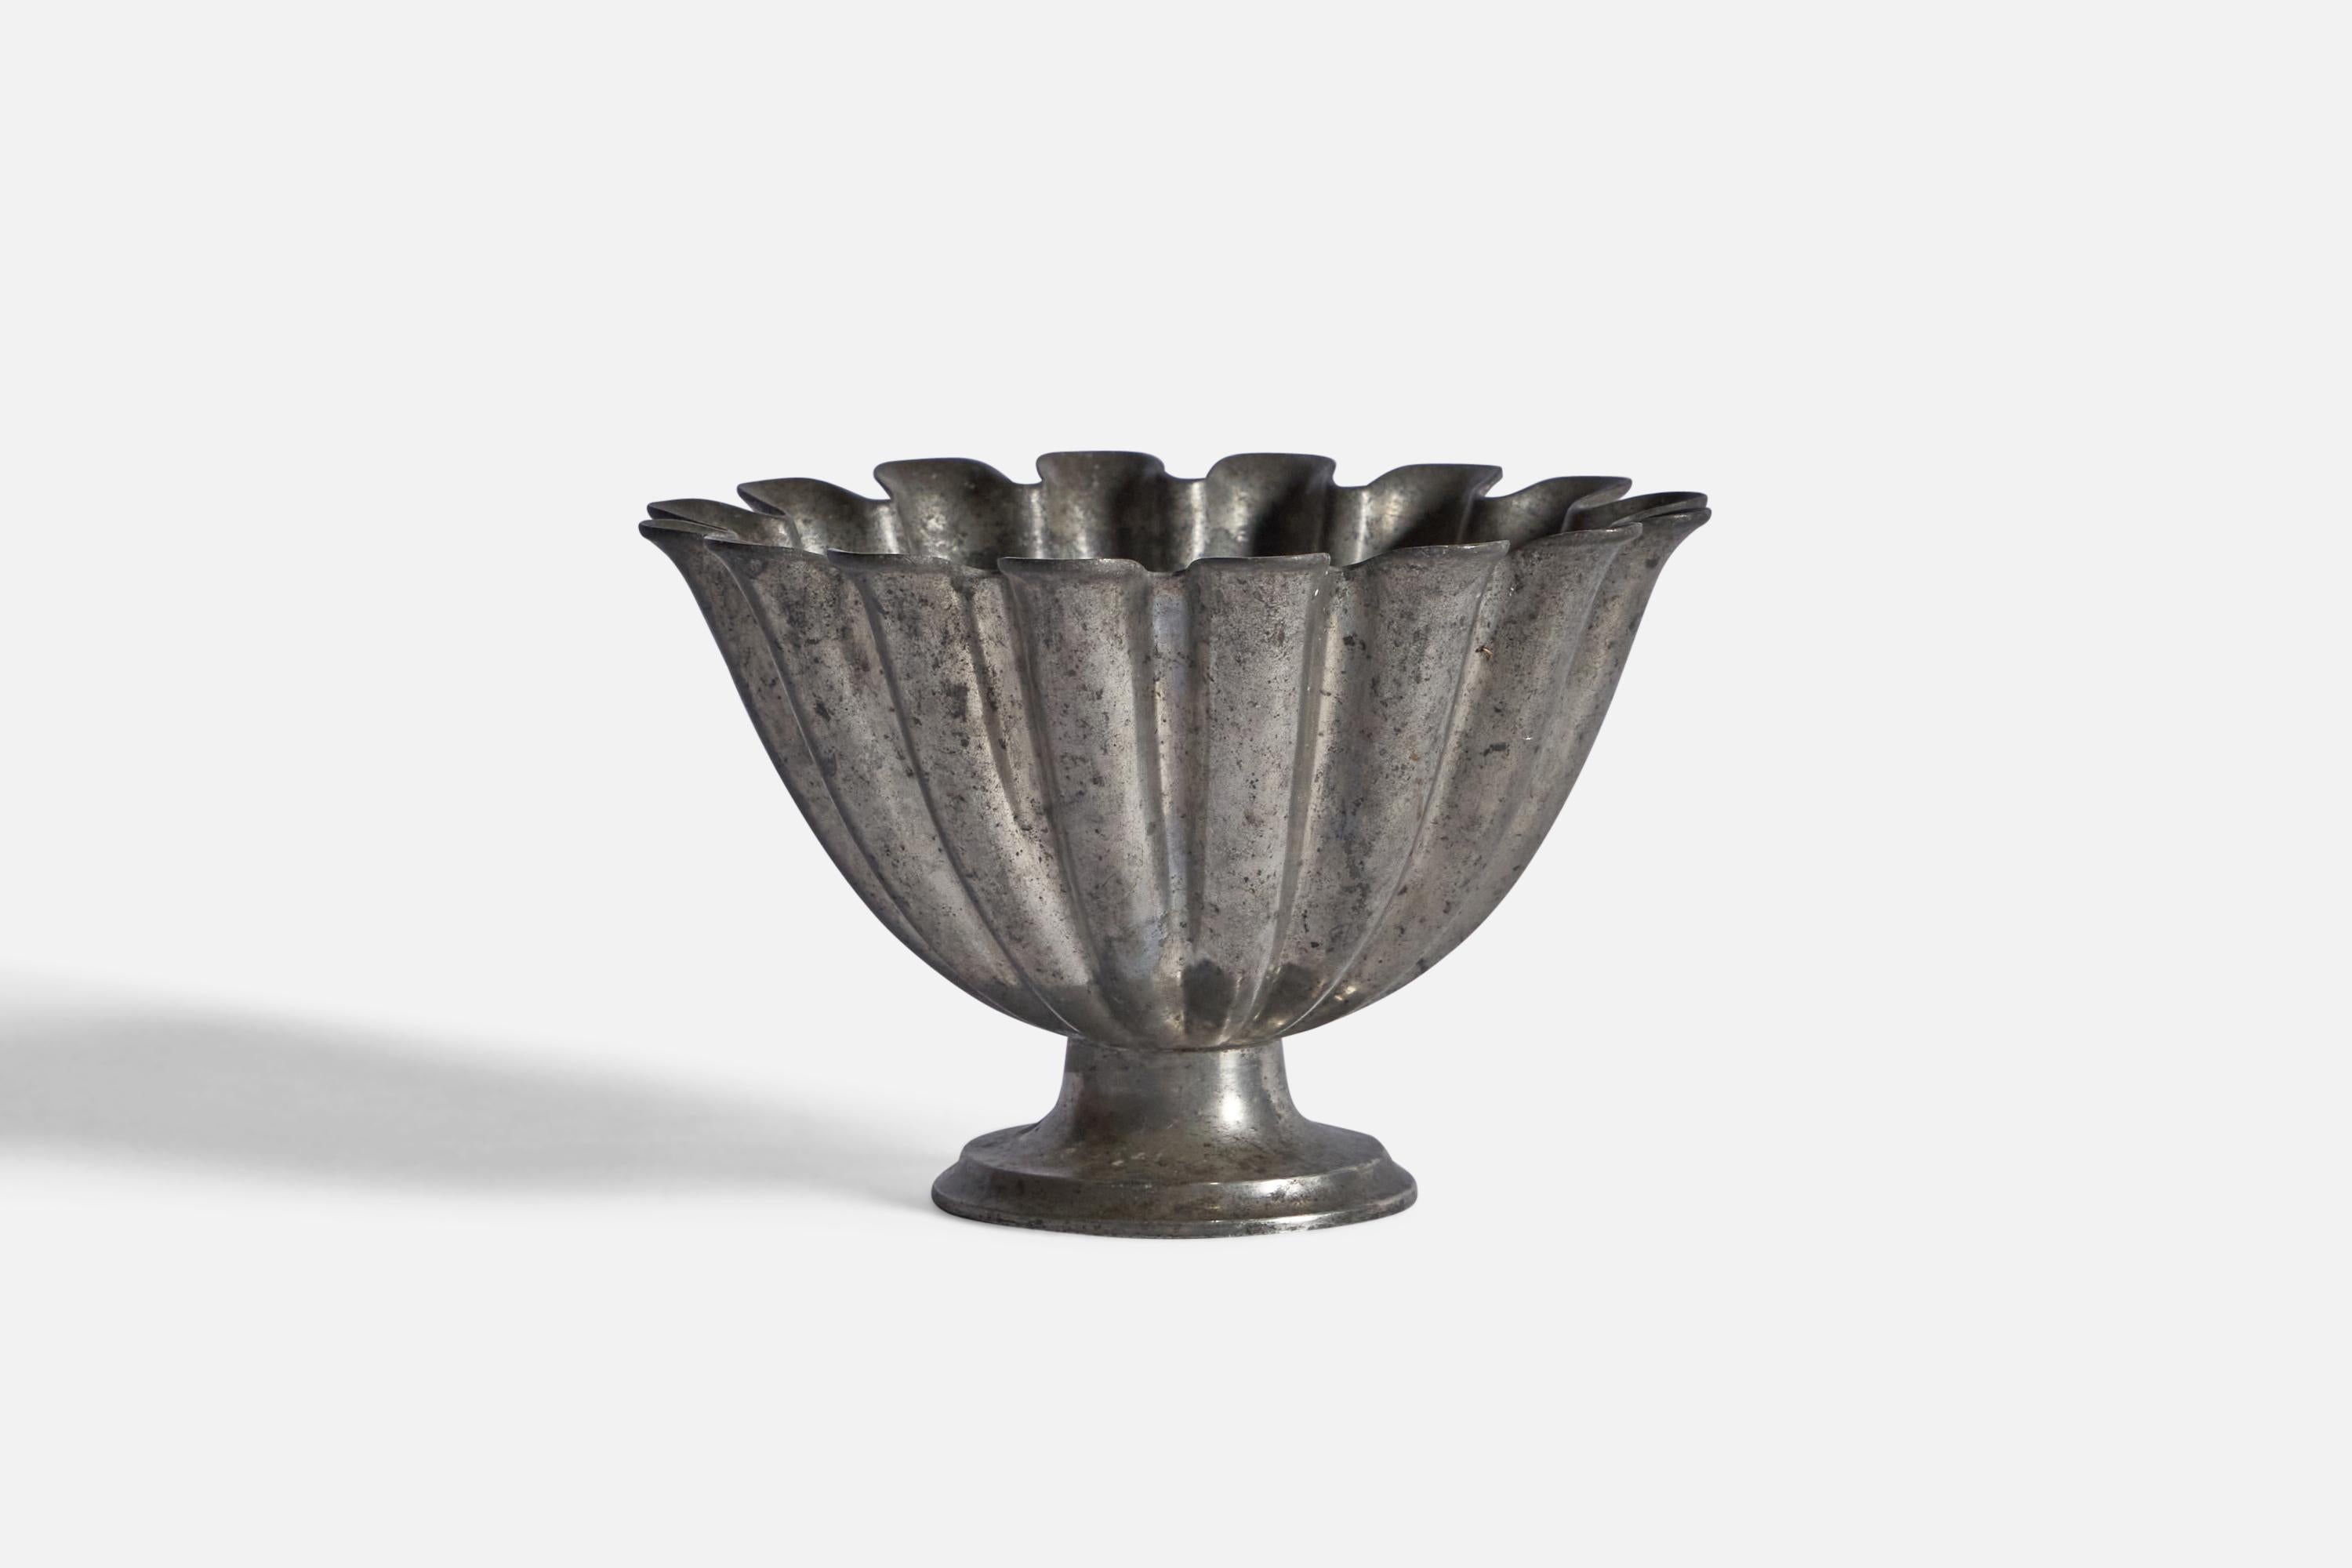 A small fluted pewter bowl designed and produced by Just Andersen, Denmark, 1930s.